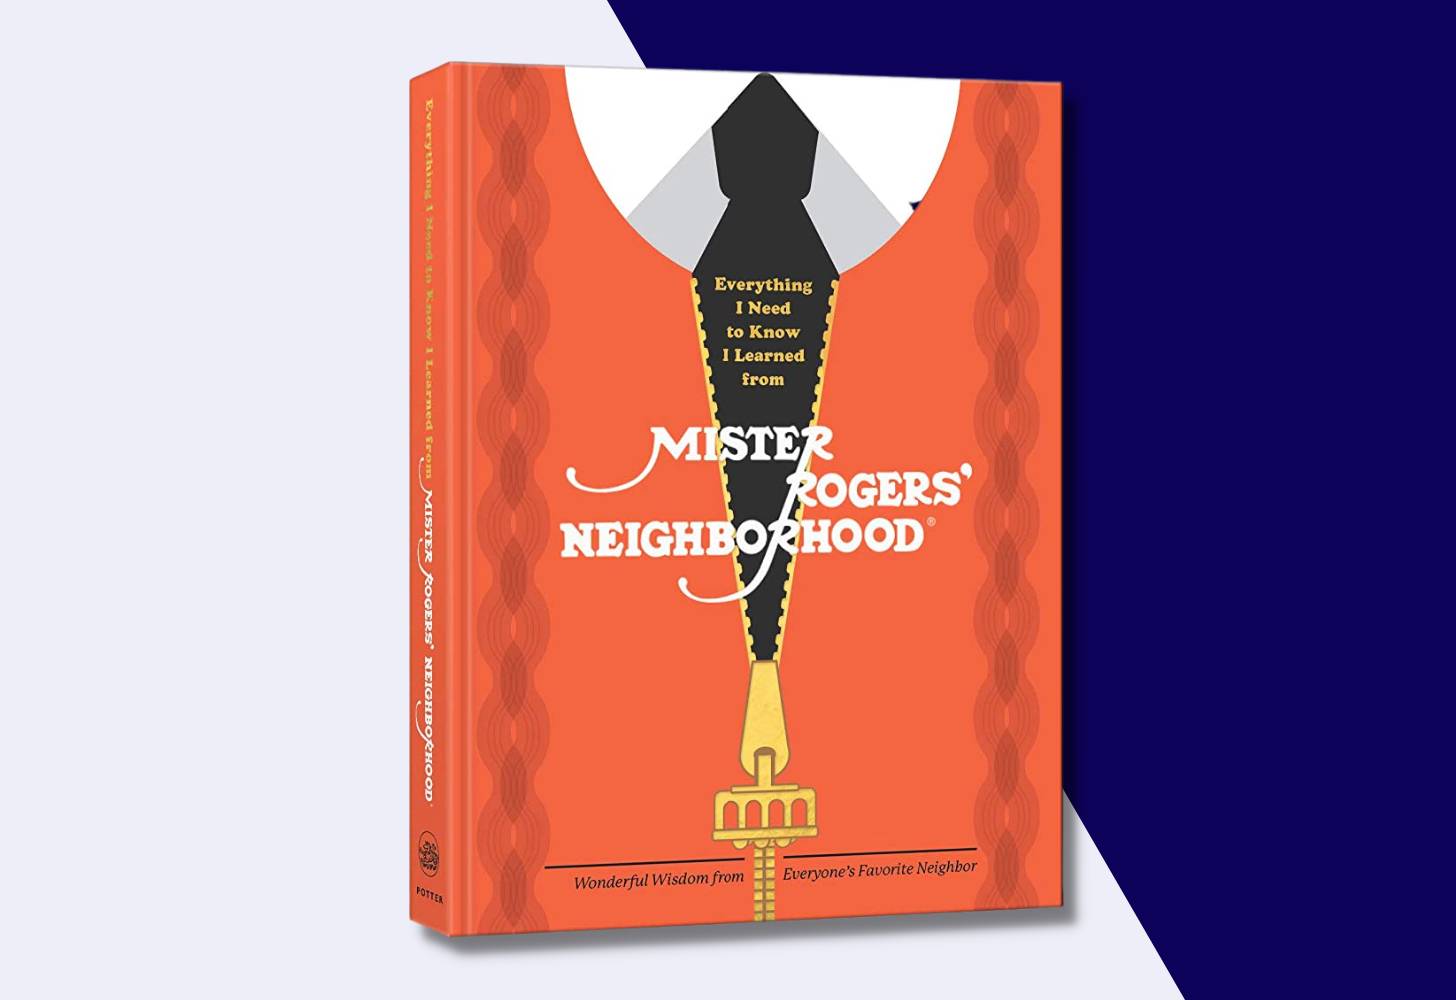 “Everything I Need to Know I Learned from Mister Rogers’ Neighborhood: Wonderful Wisdom from Everyone’s Favorite Neighbor” by Melissa Wagner with Fred Rogers Productions, illustrated by Max Dalton